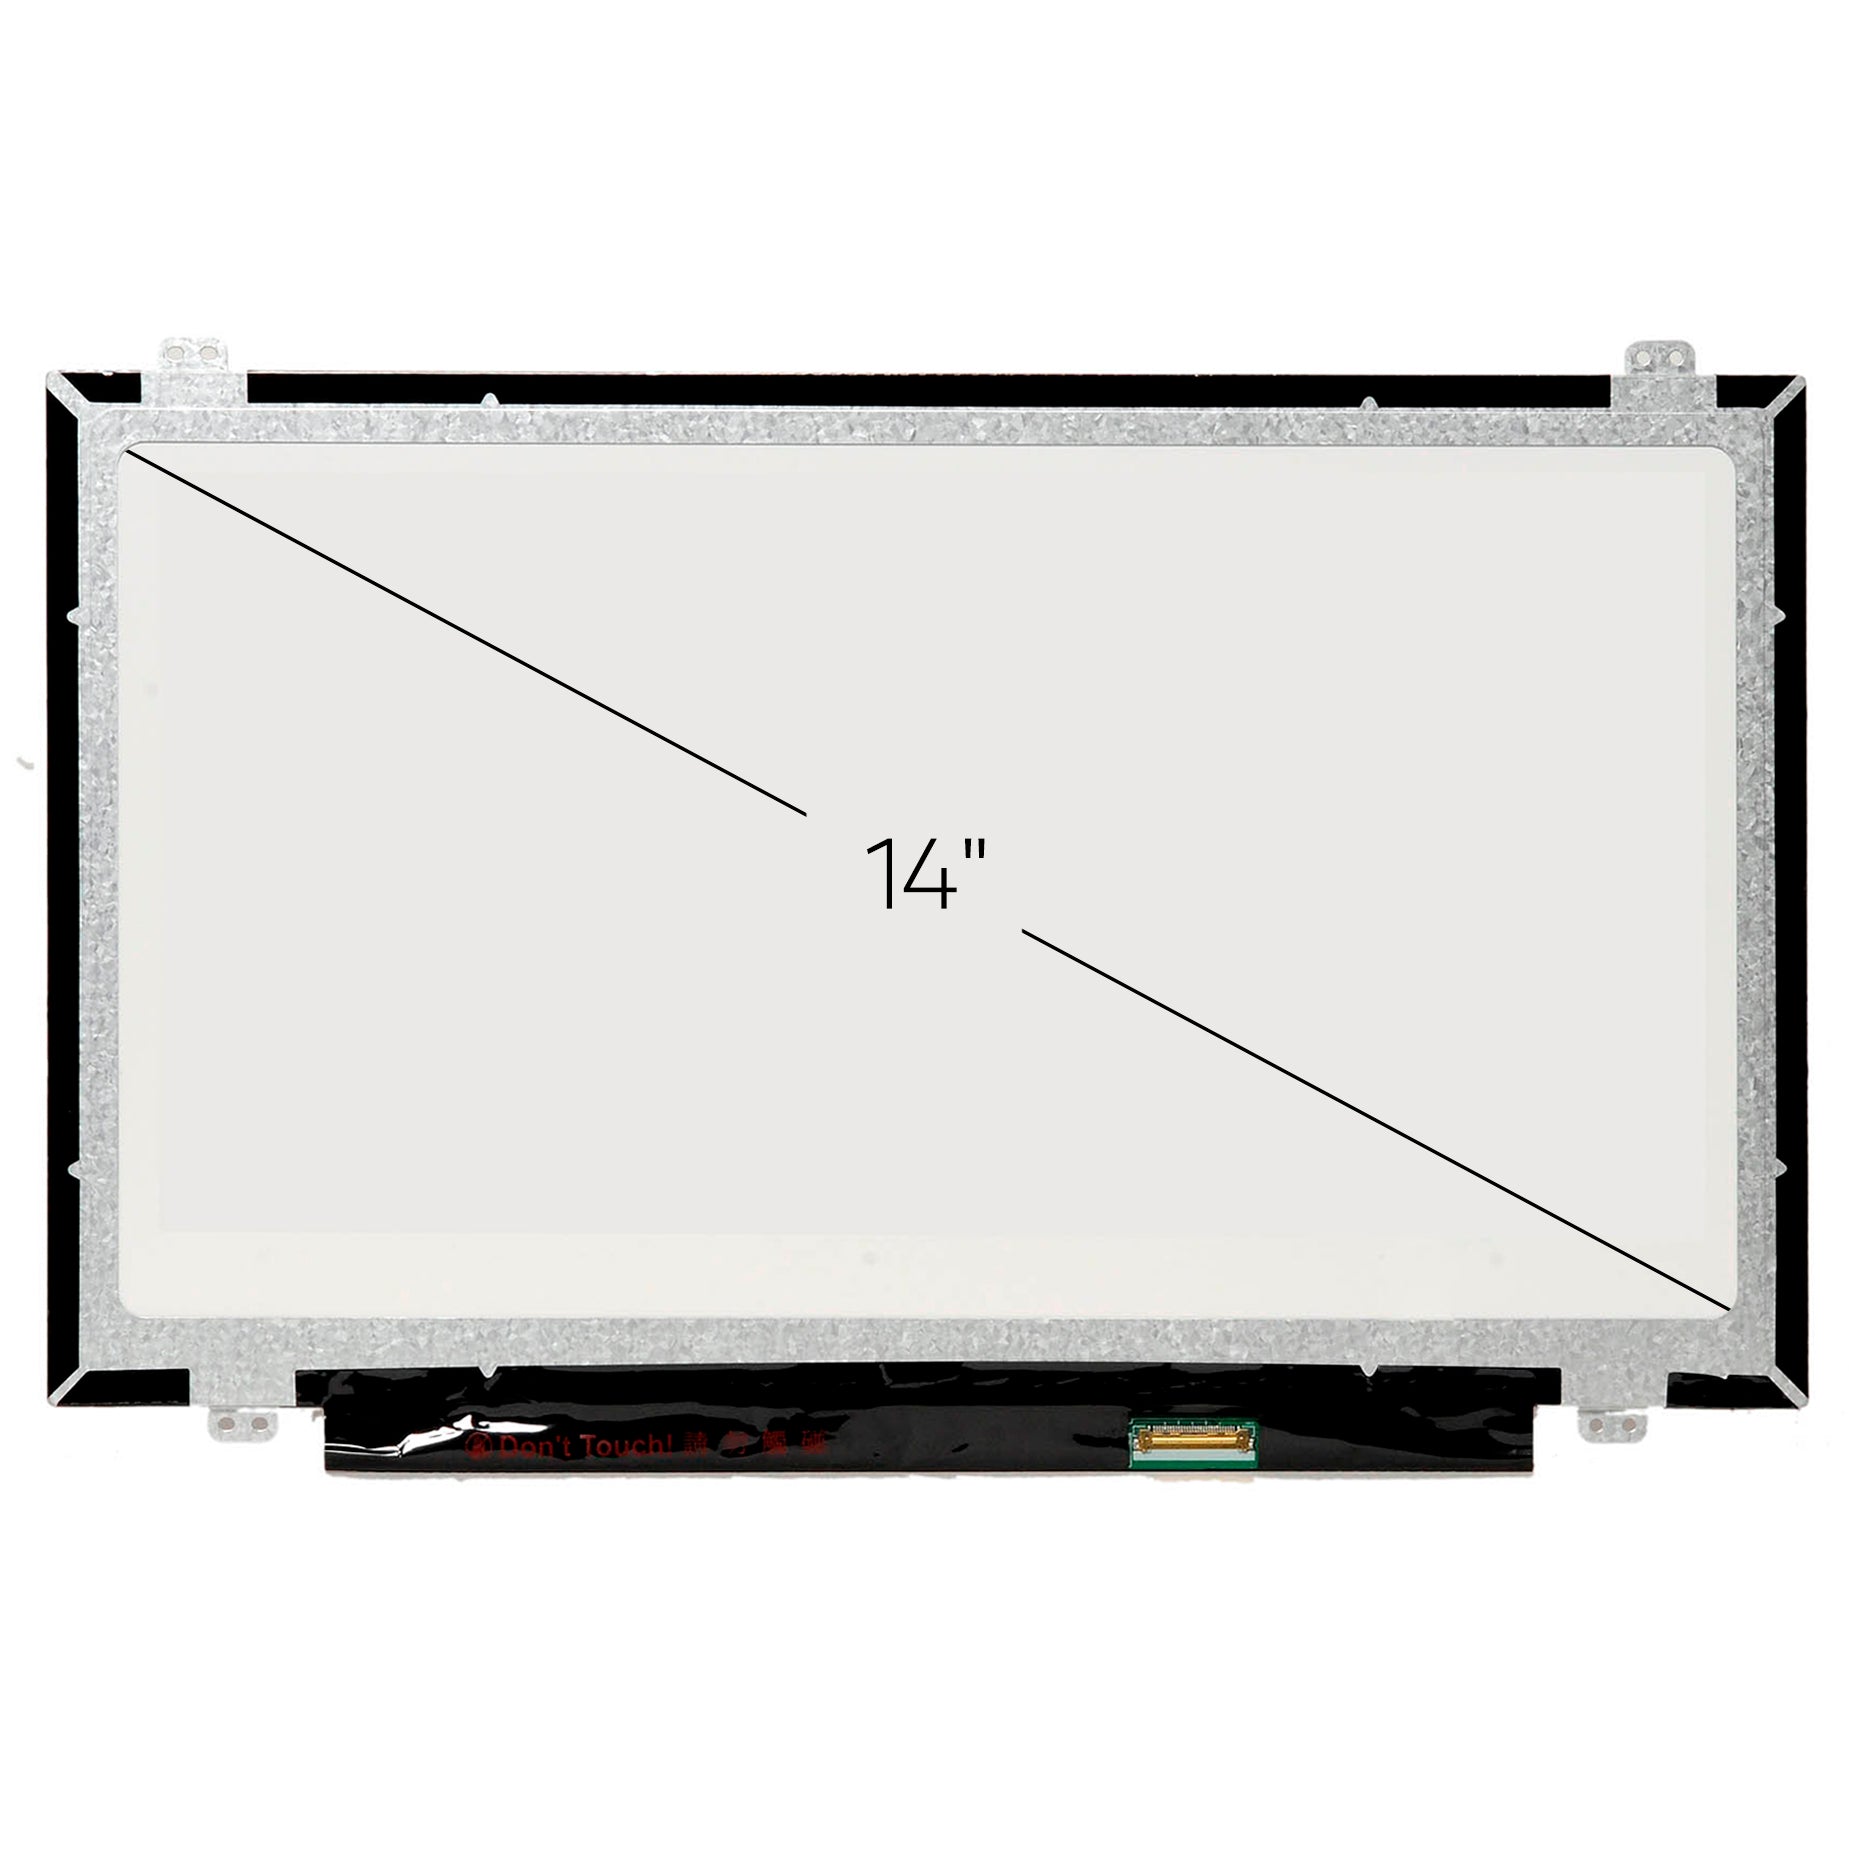 Screen Replacement for HB140WX1-301 V4.0 HD 1366x768 Glossy LCD LED Display